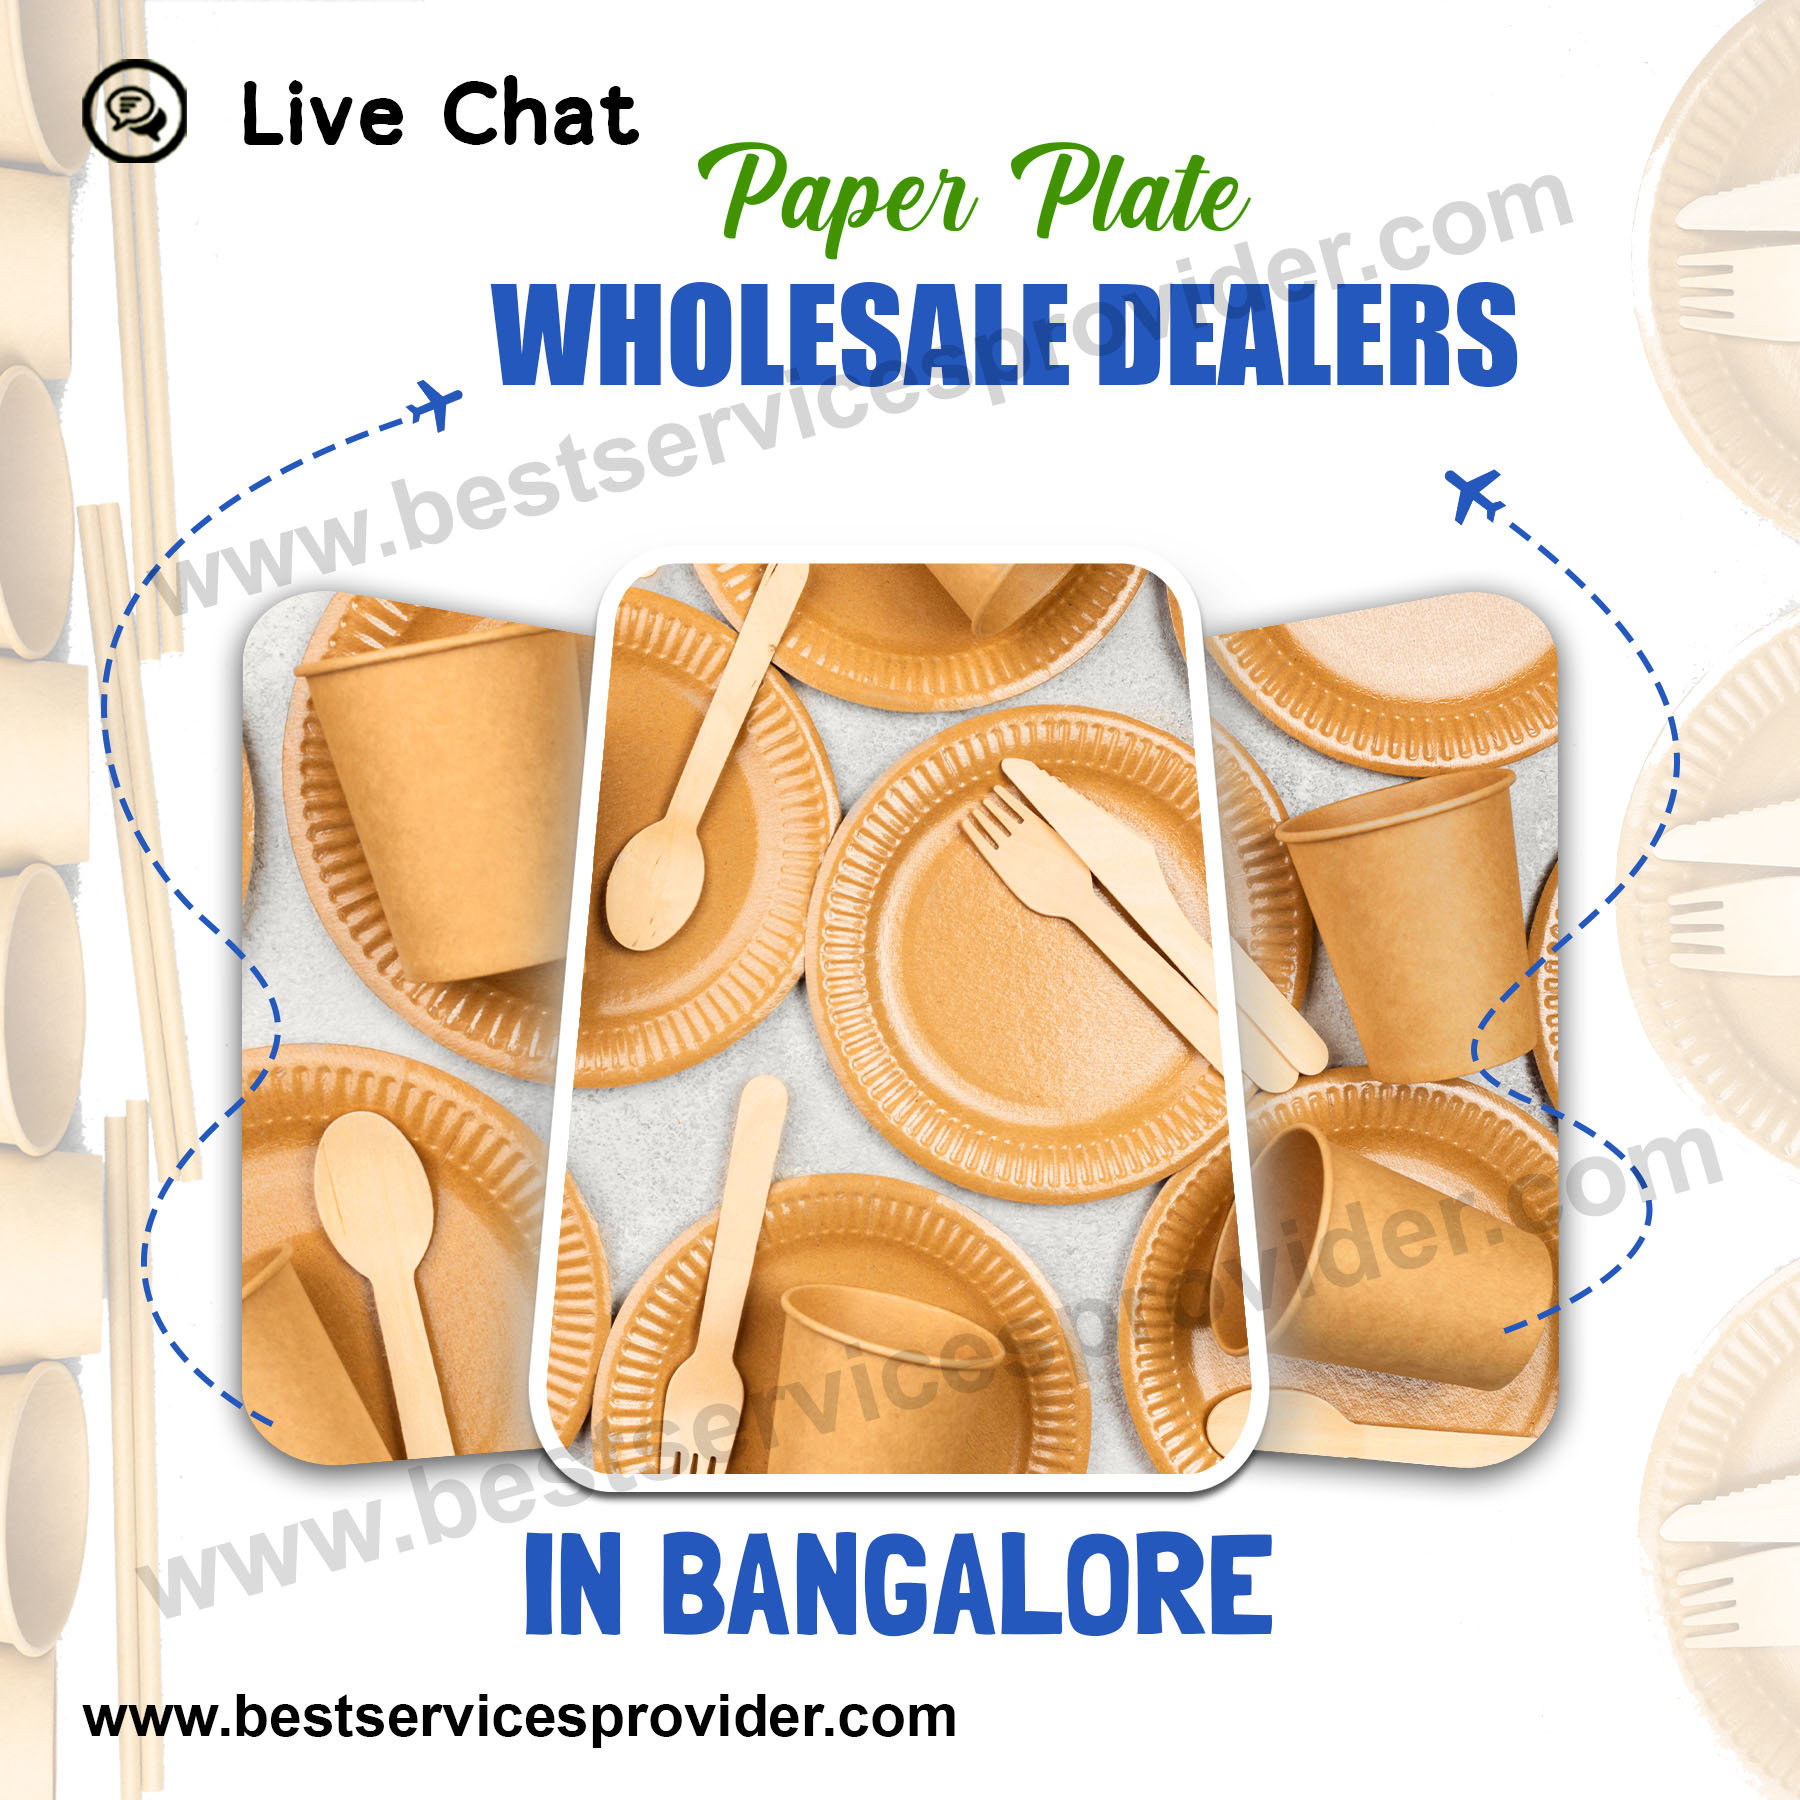 Paper Plate Wholesale Dealers In Bangalore